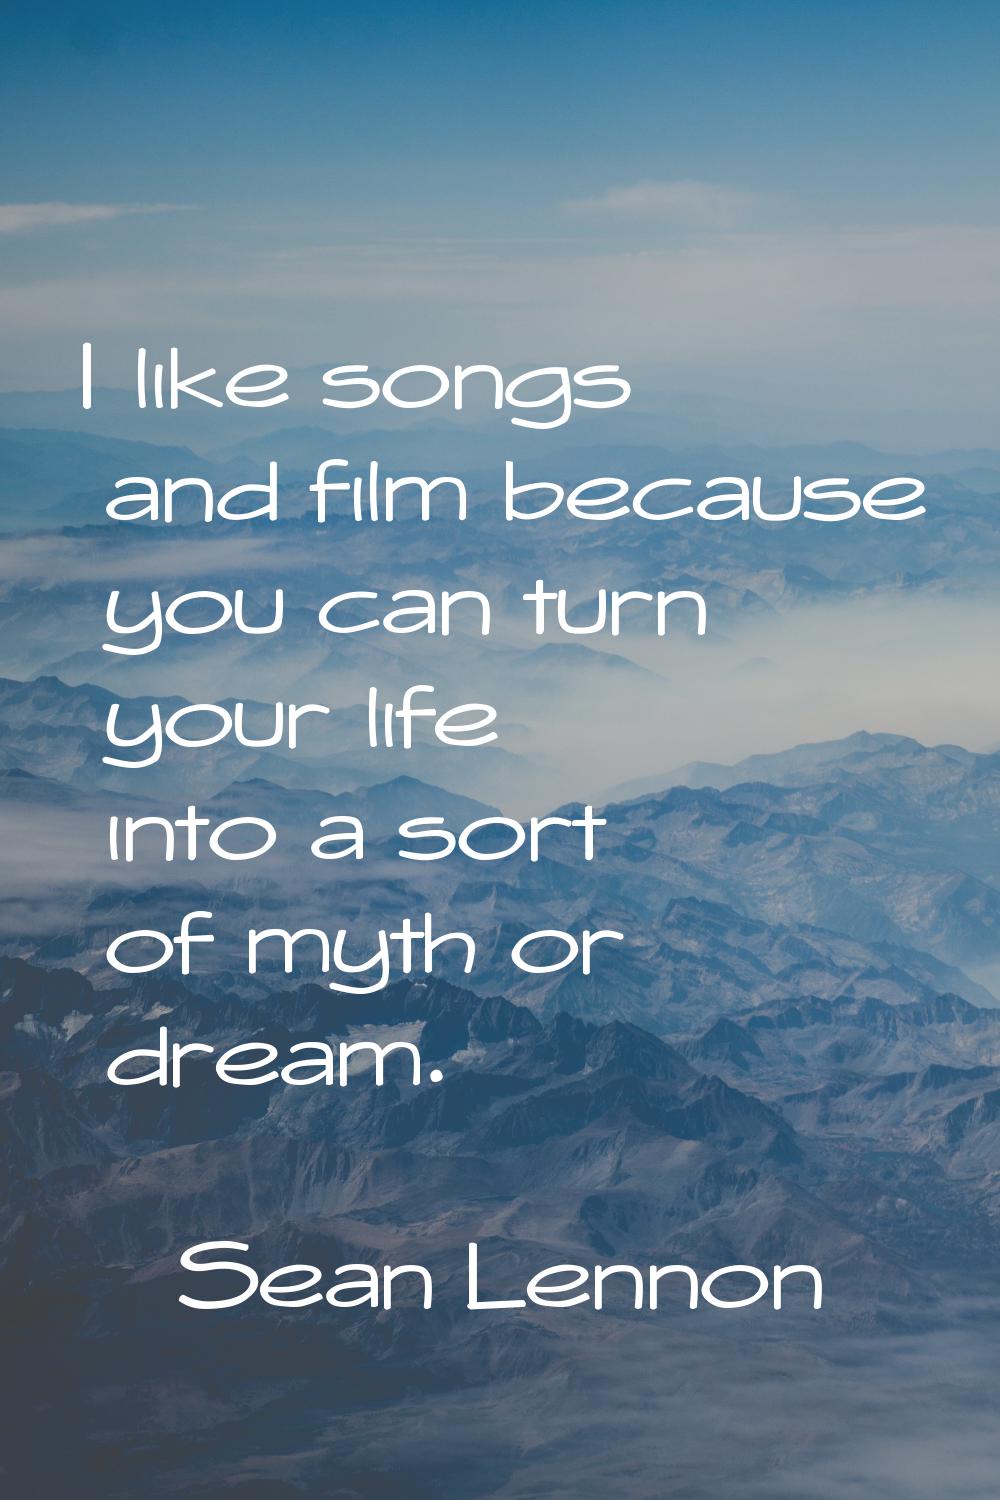 I like songs and film because you can turn your life into a sort of myth or dream.